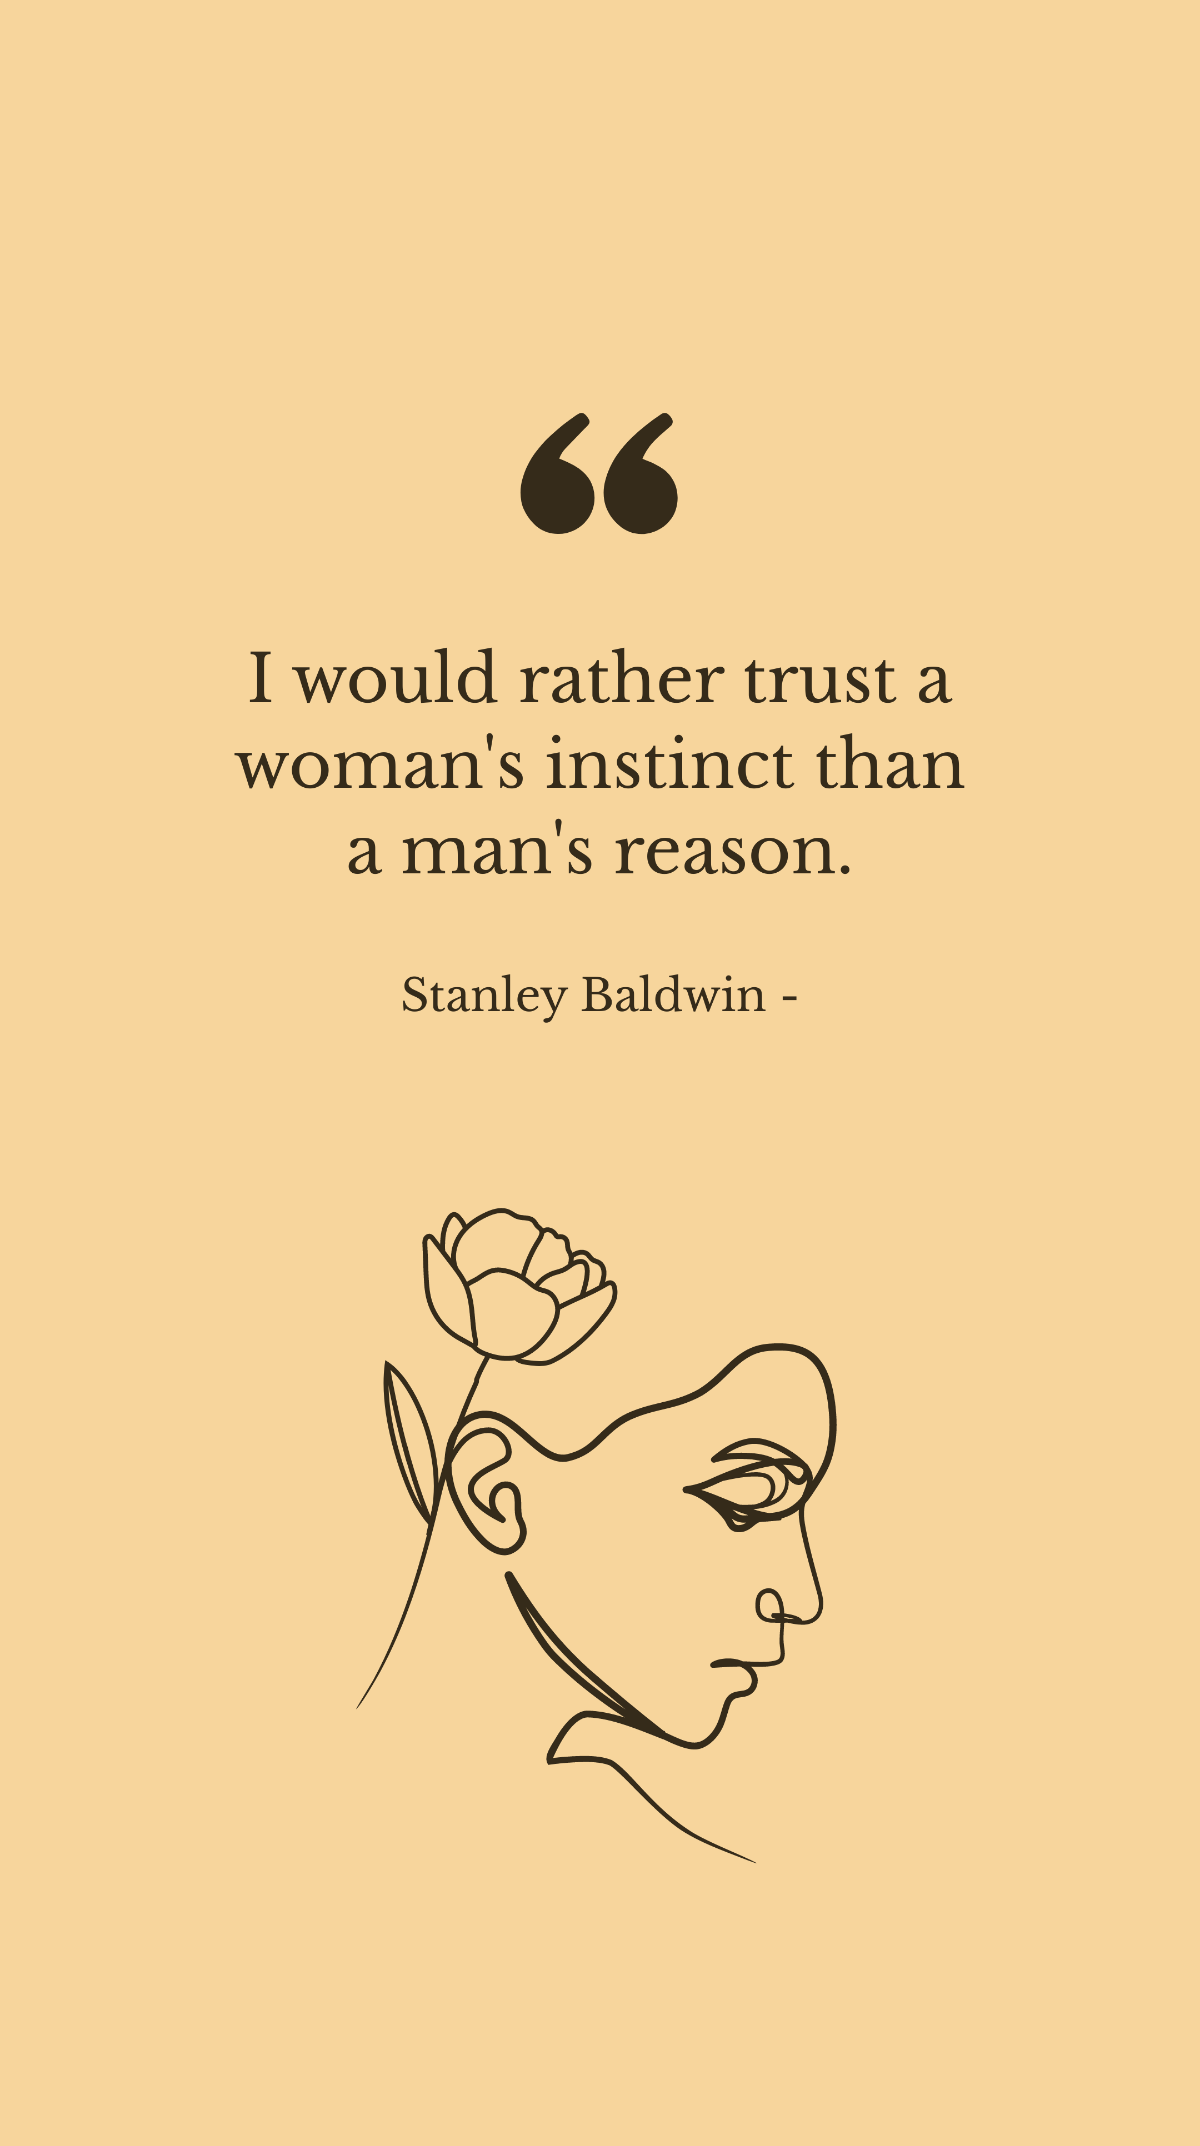 Free Stanley Baldwin - I would rather trust a woman's instinct than a man's reason. Template